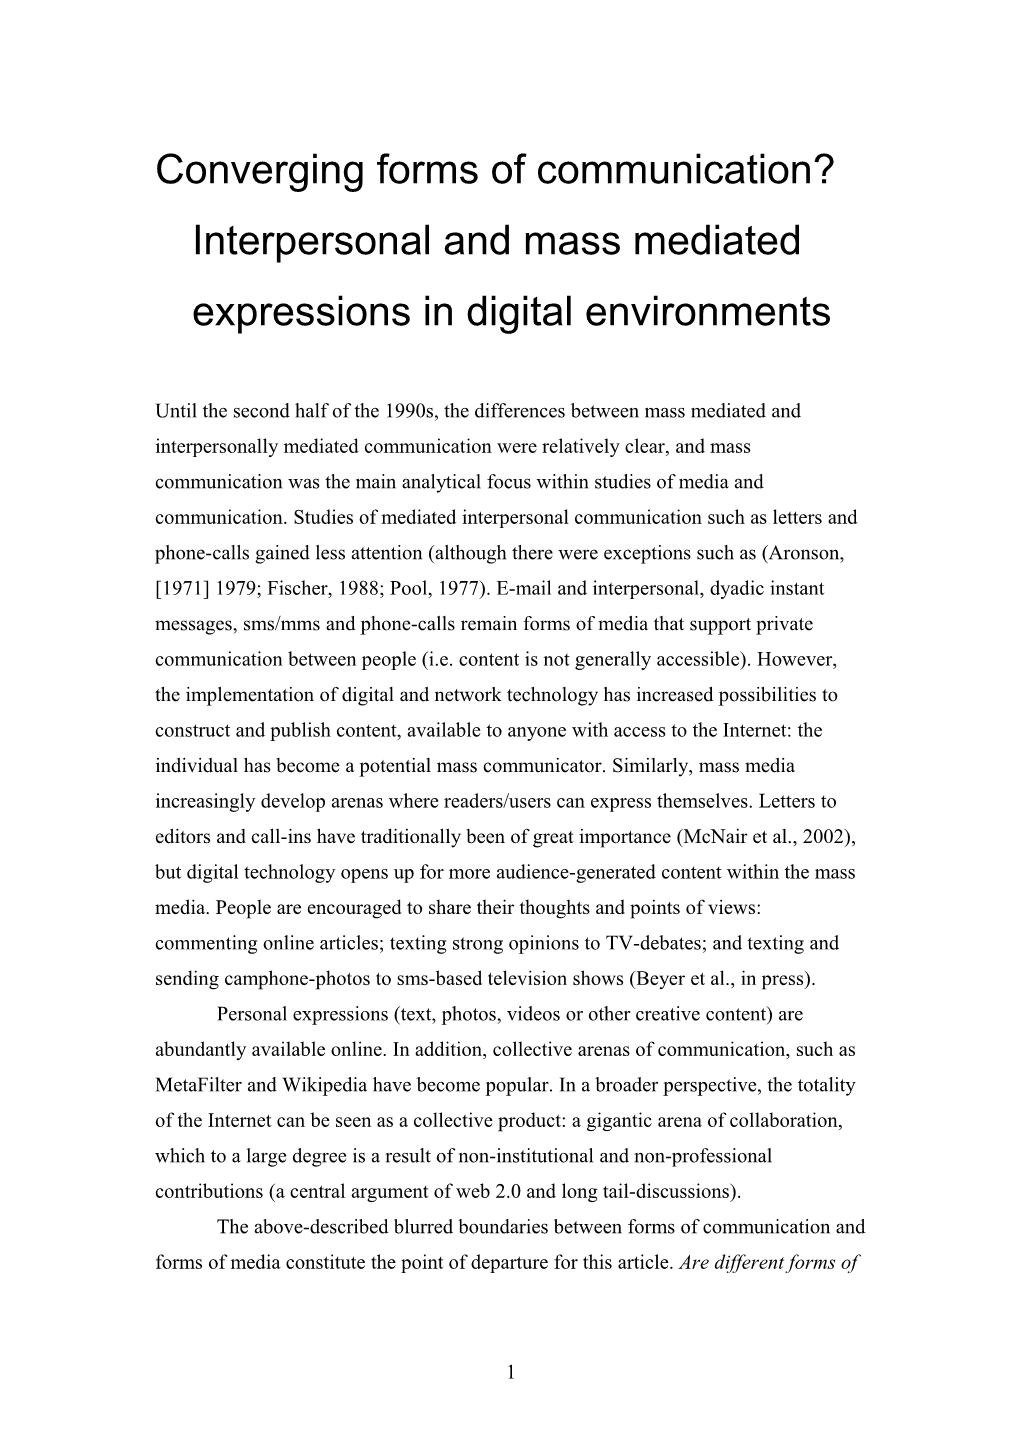 Converging Forms of Communication? Interpersonal and Mass Mediated Expressions in Digital